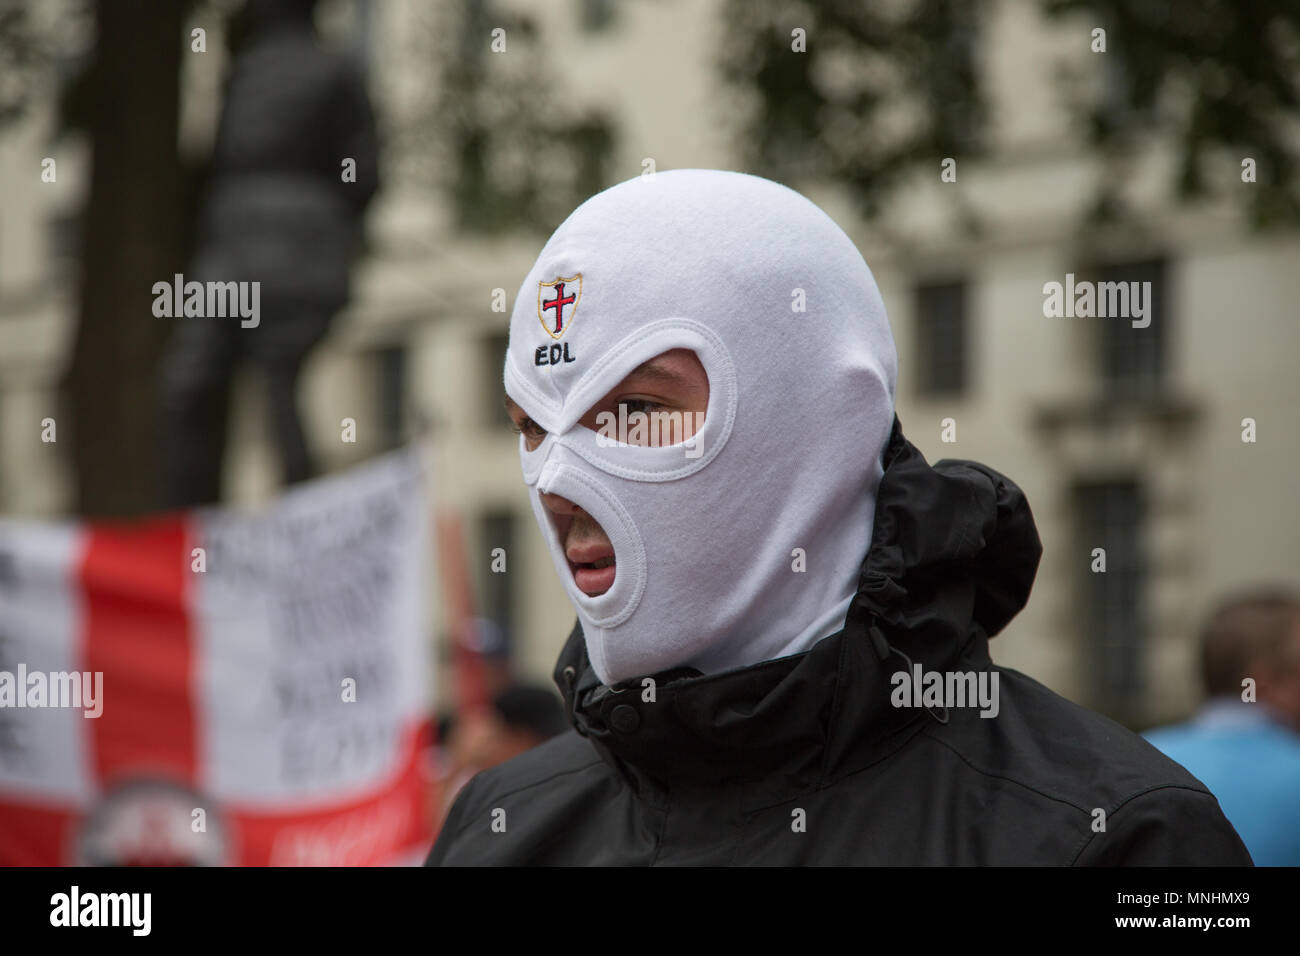 A member of the EDL wearing a white balaclava with the word EDL printed on it Stock Photo